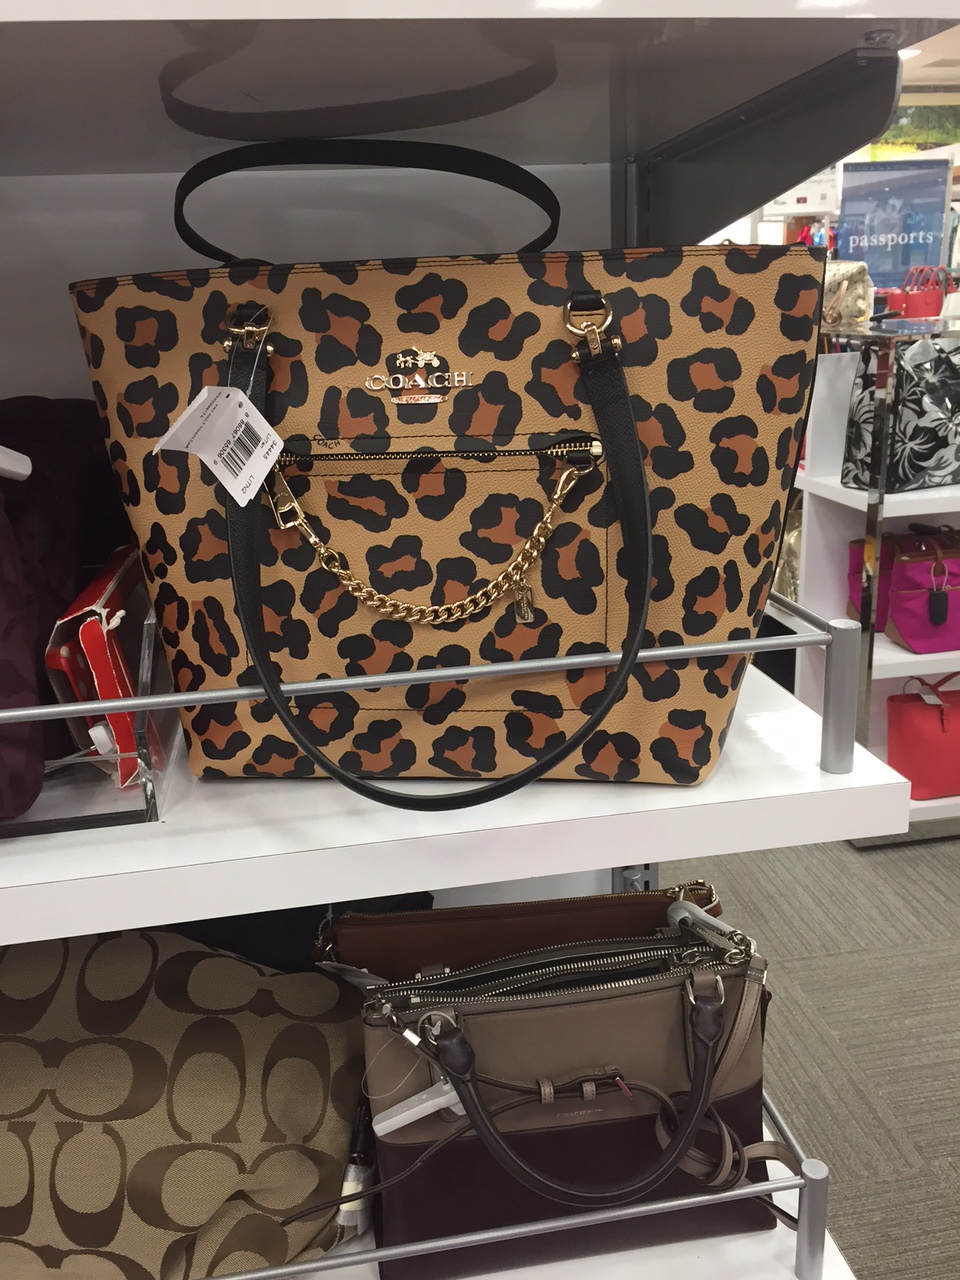 The purse I was eyeing at the PX... Yaass! but ultimately no.